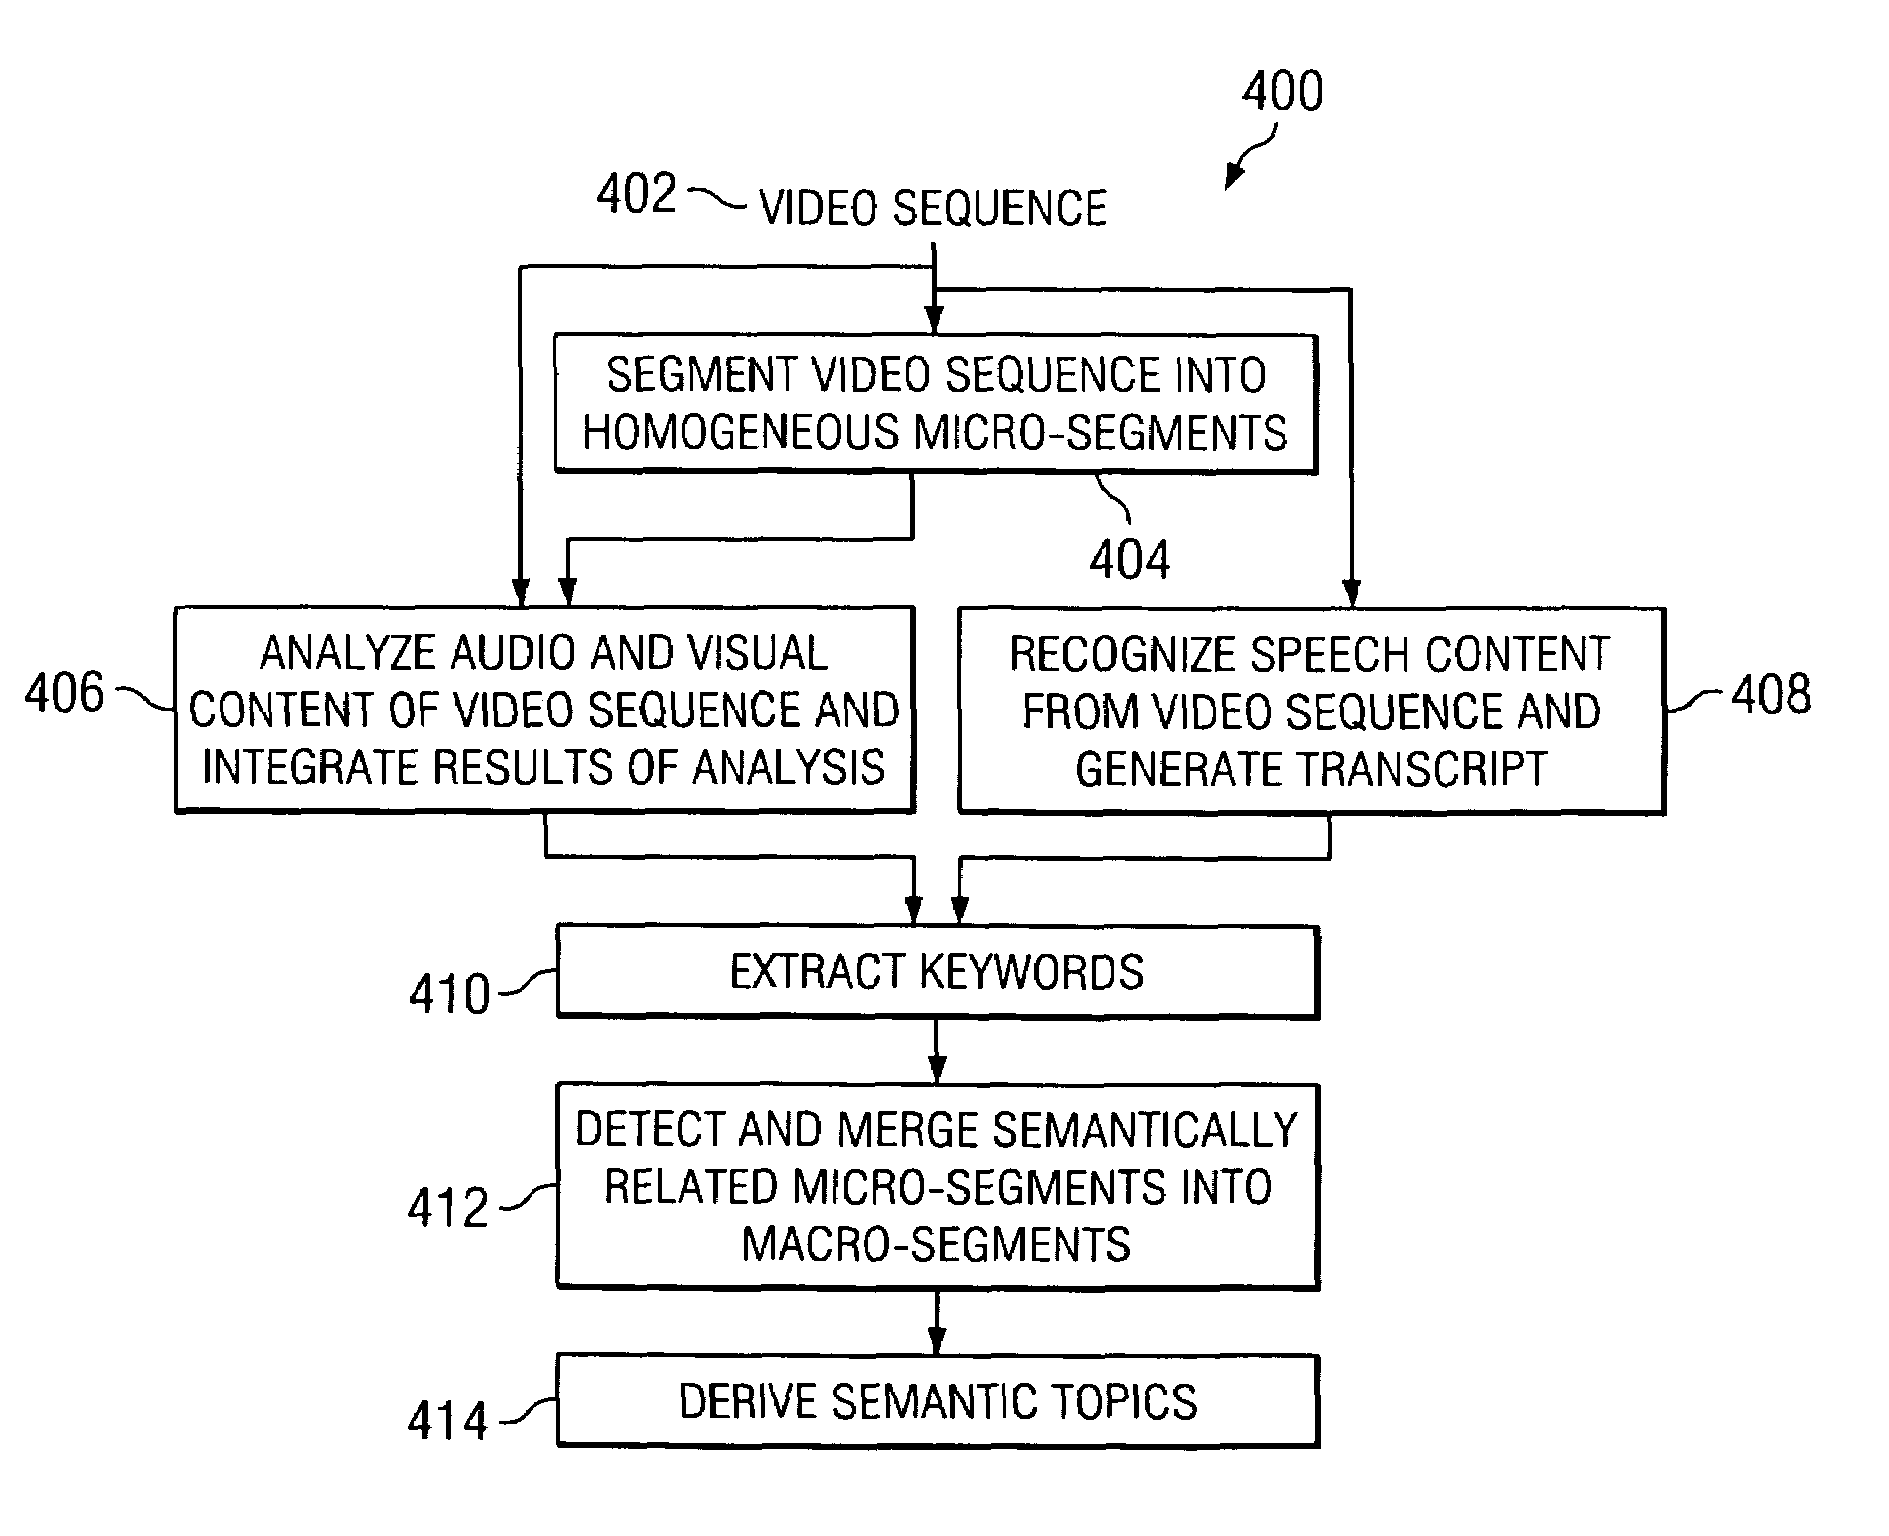 System and method for semantic video segmentation based on joint audiovisual and text analysis